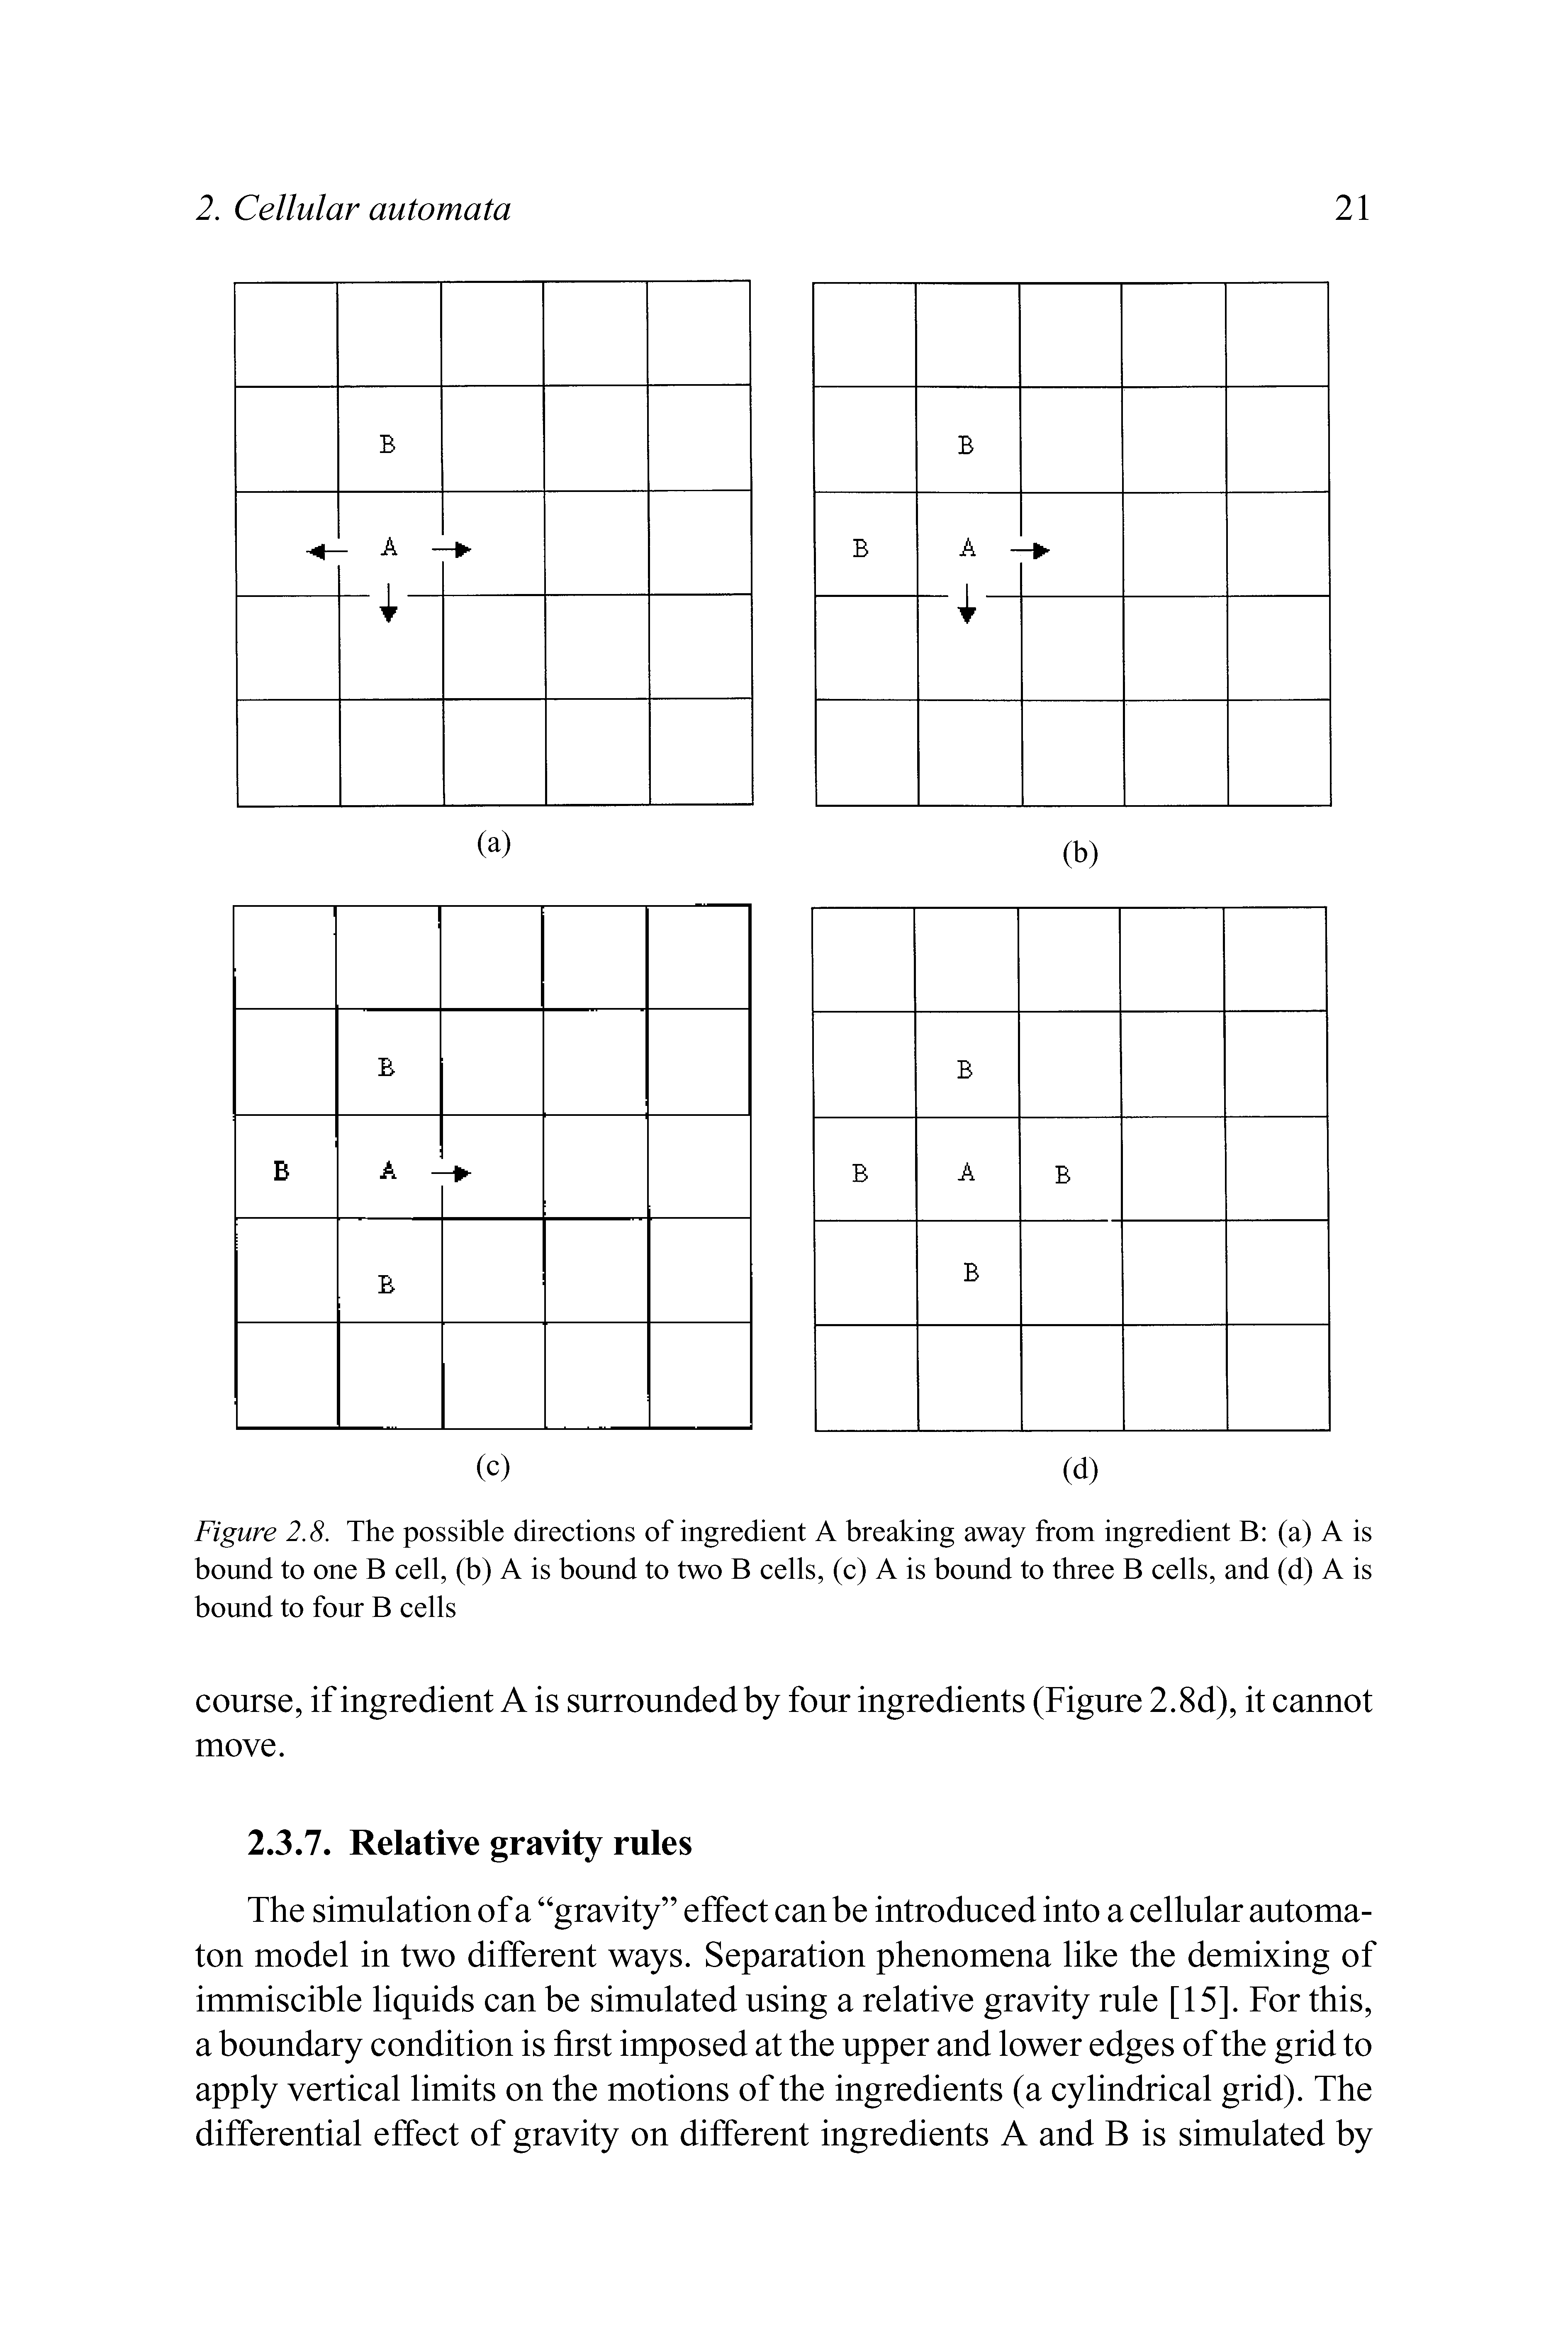 Figure 2.8. The possible direetions of ingredient A breaking away from ingredient B (a) A is bound to one B eell, (b) A is bound to two B eells, (e) A is bound to three B eells, and (d) A is bound to four B eells...